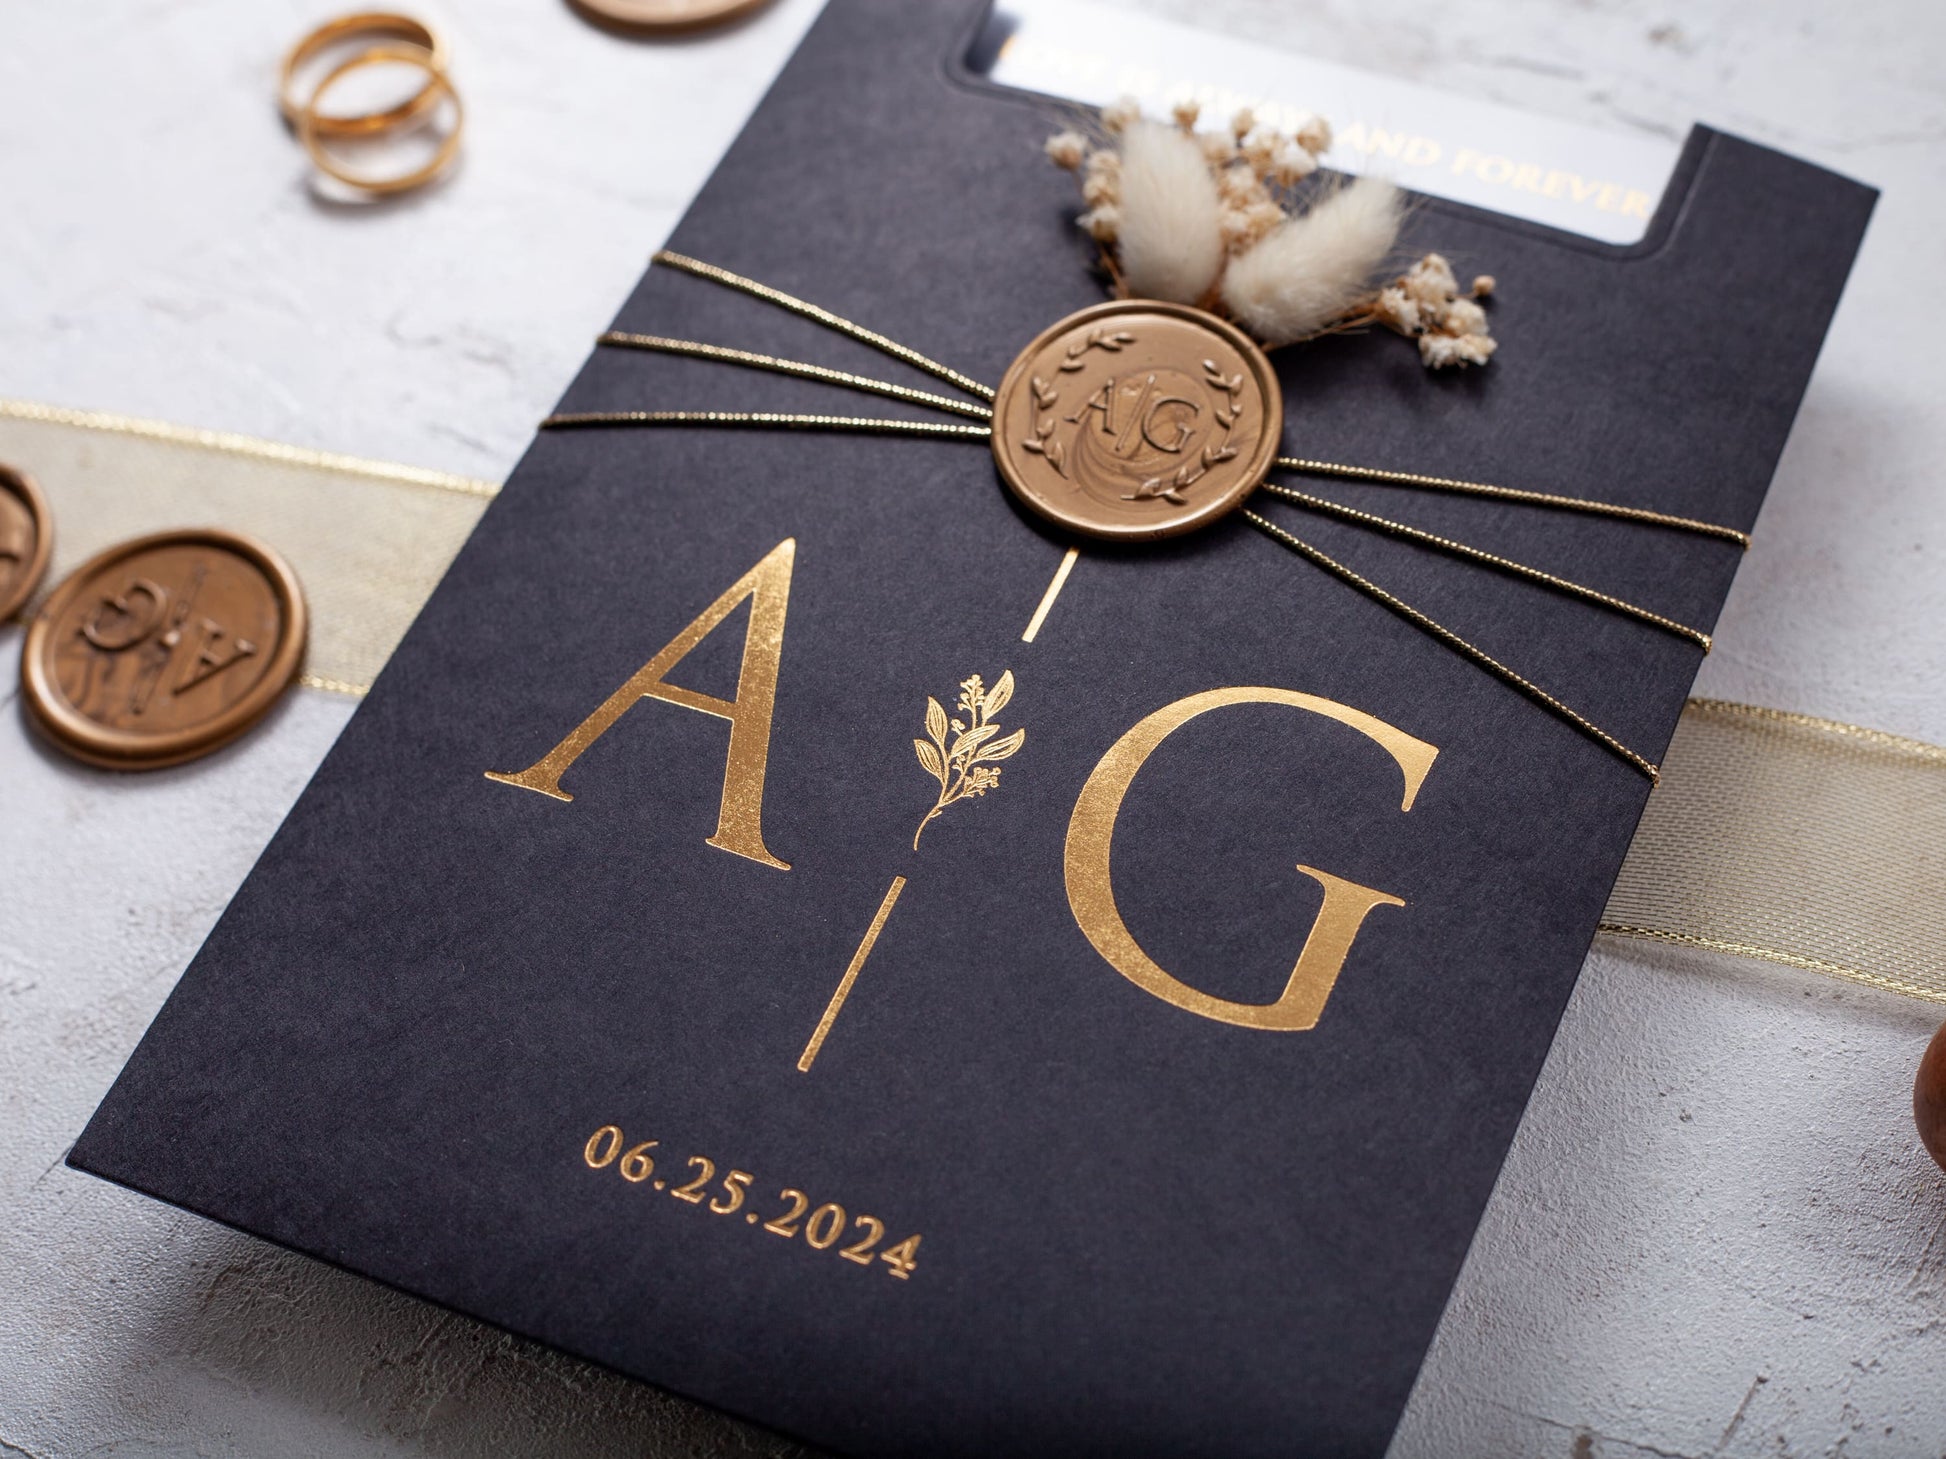 Gold foil printed acrylic invitation with black pocket type envelope, gold wax & seal and dried flowers